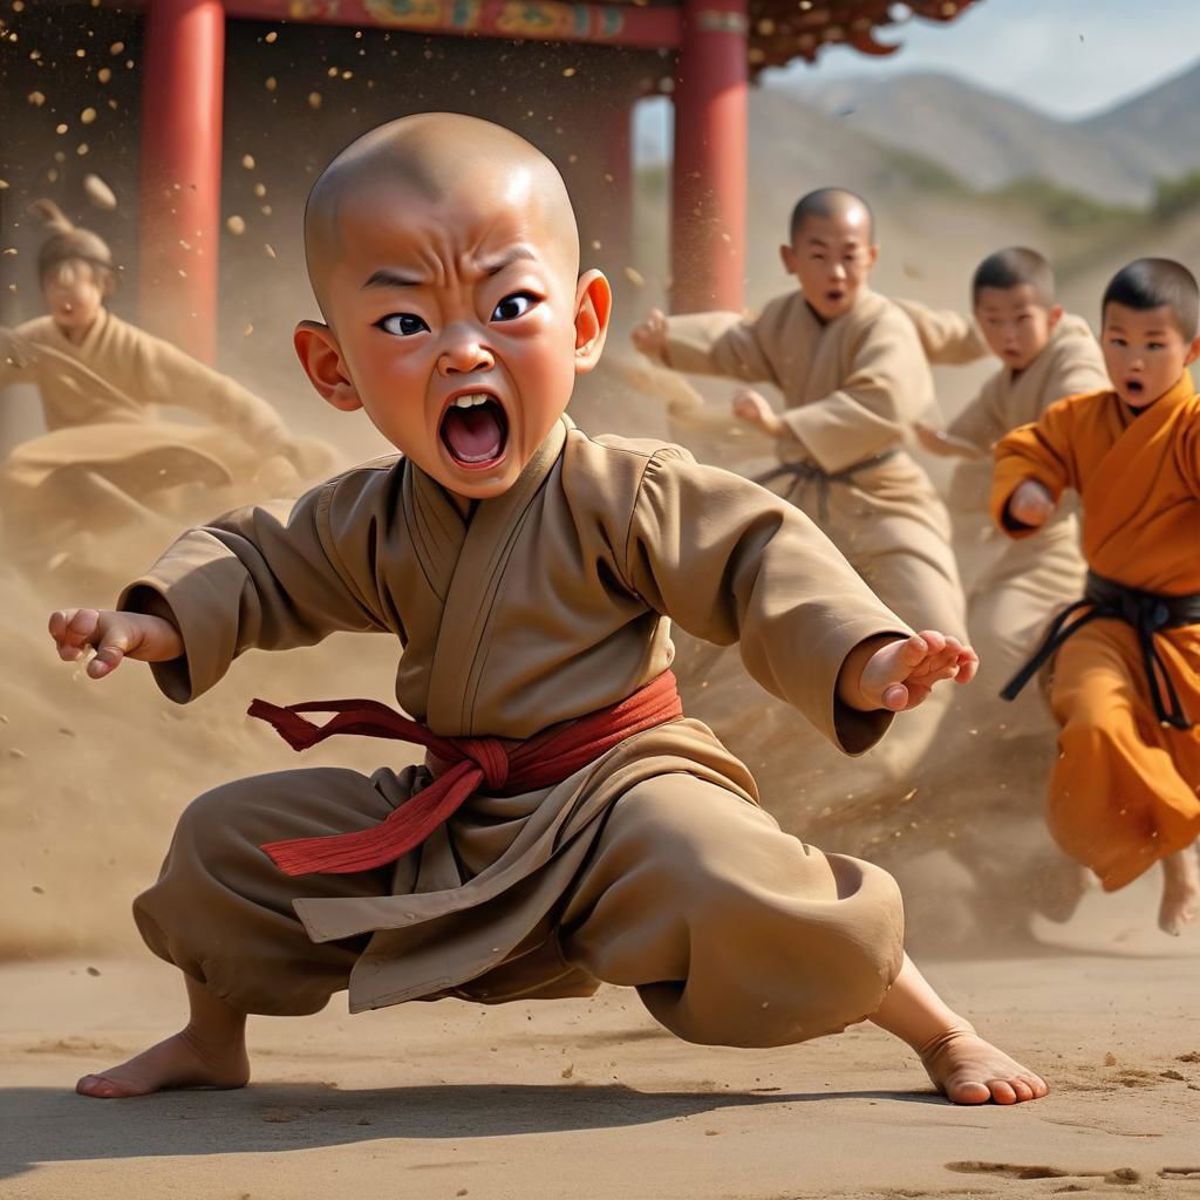 A young boy in a karate outfit yelling at the camera while the other kids are running.